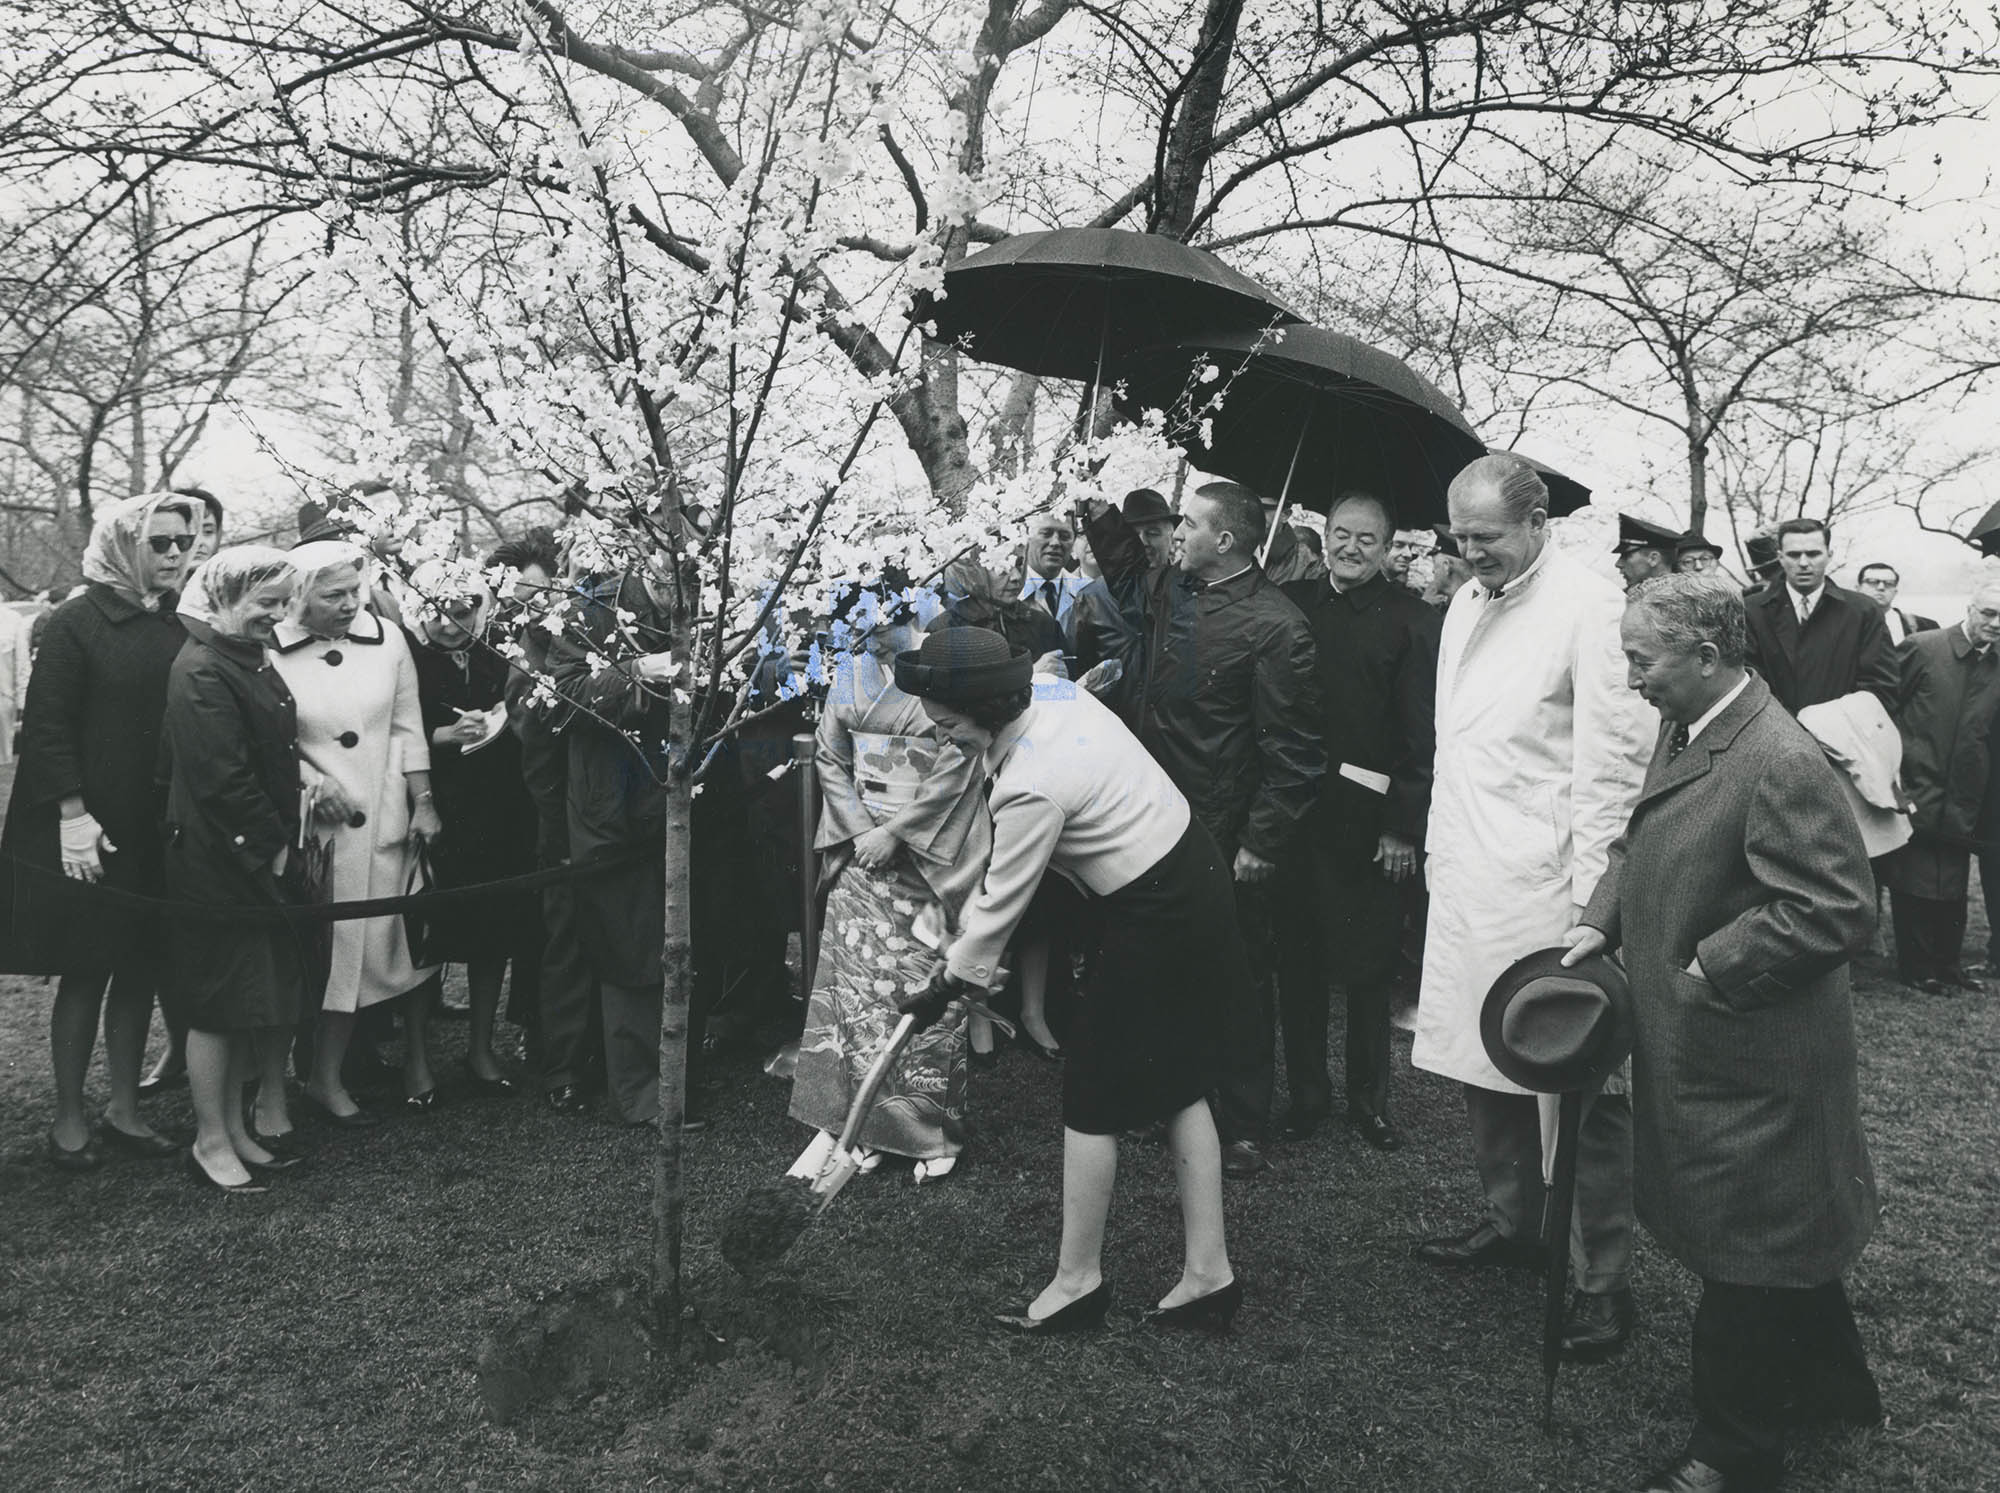 First Lady Johnson and Mrs. Ryuji Takeuchi reenacting the original 1912 planting of the first cherry trees on the National Mall